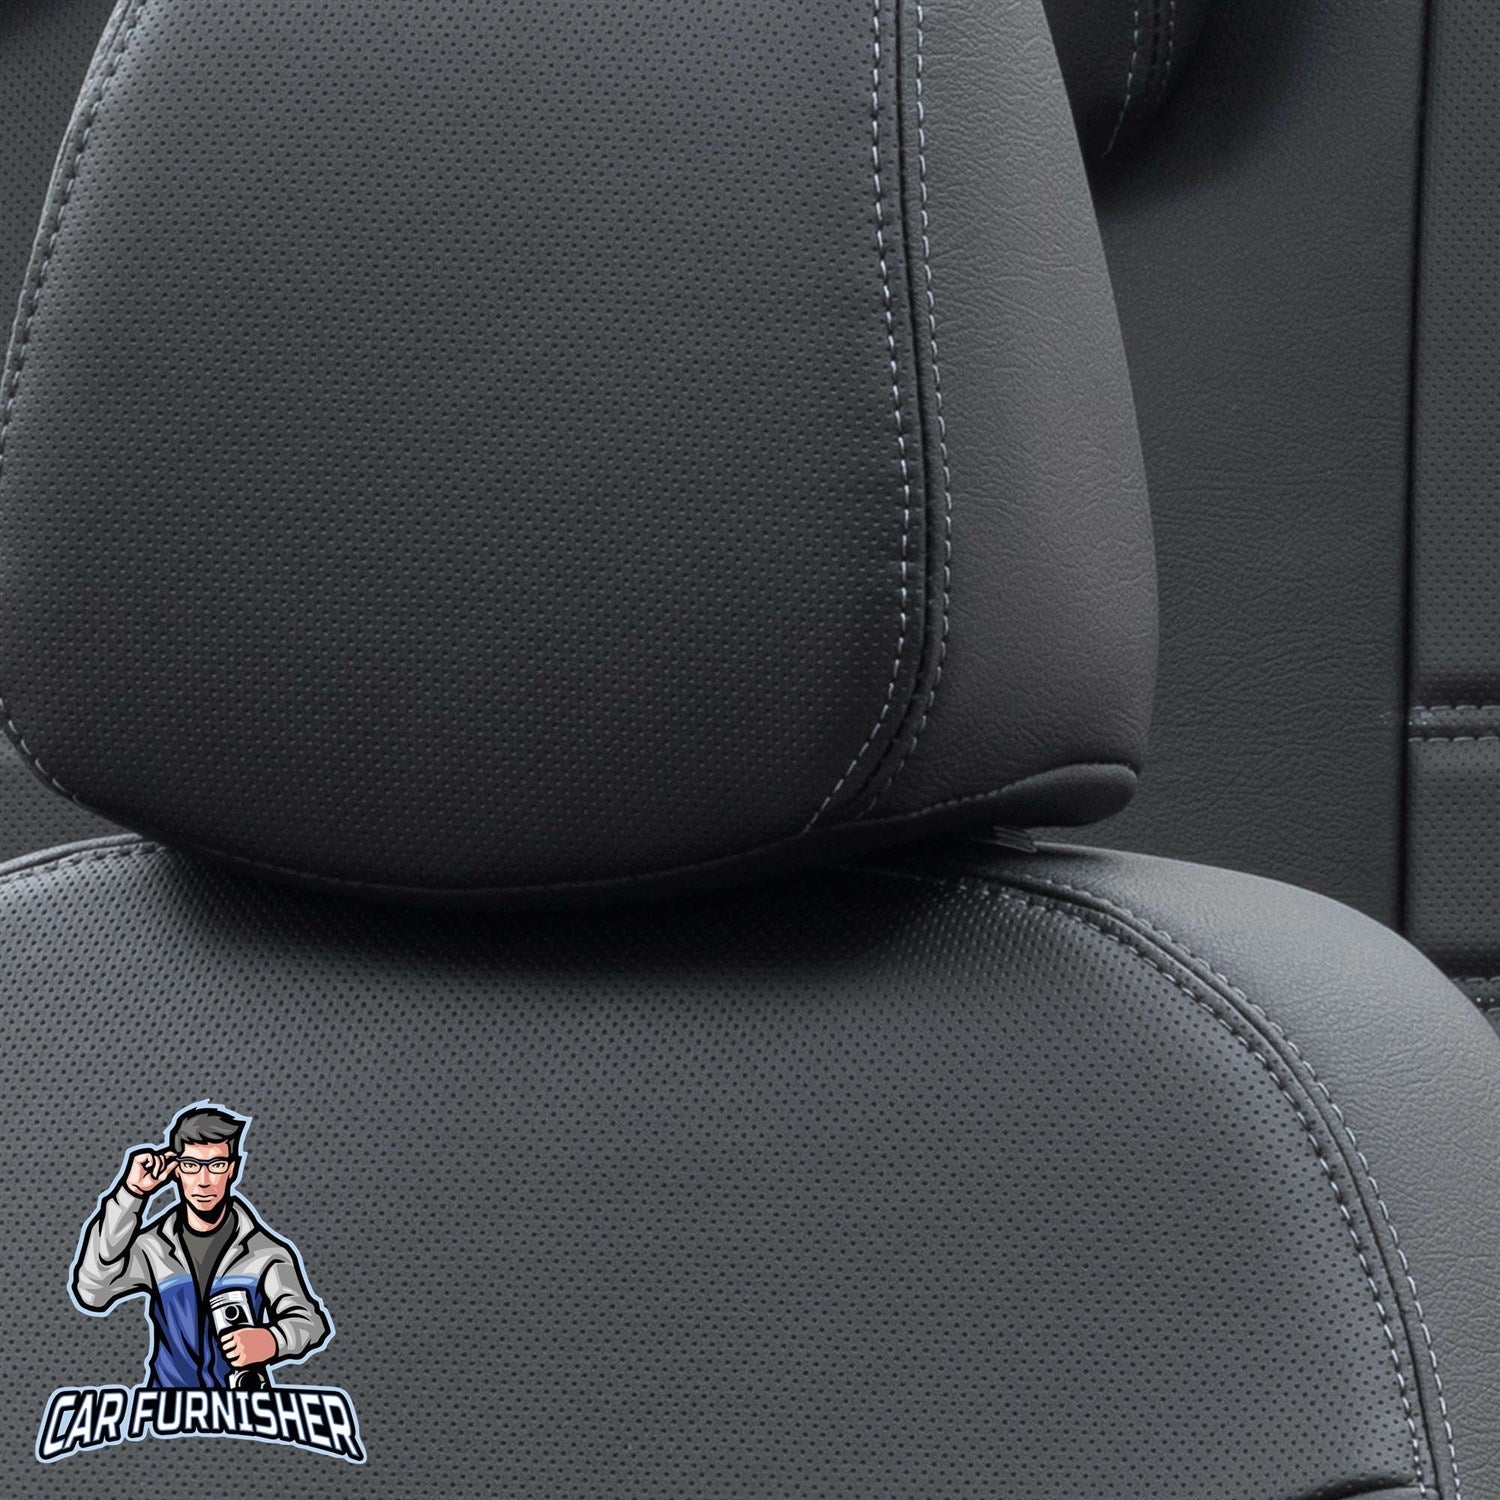 Citroen C3 Seat Covers Istanbul Leather Design Black Leather